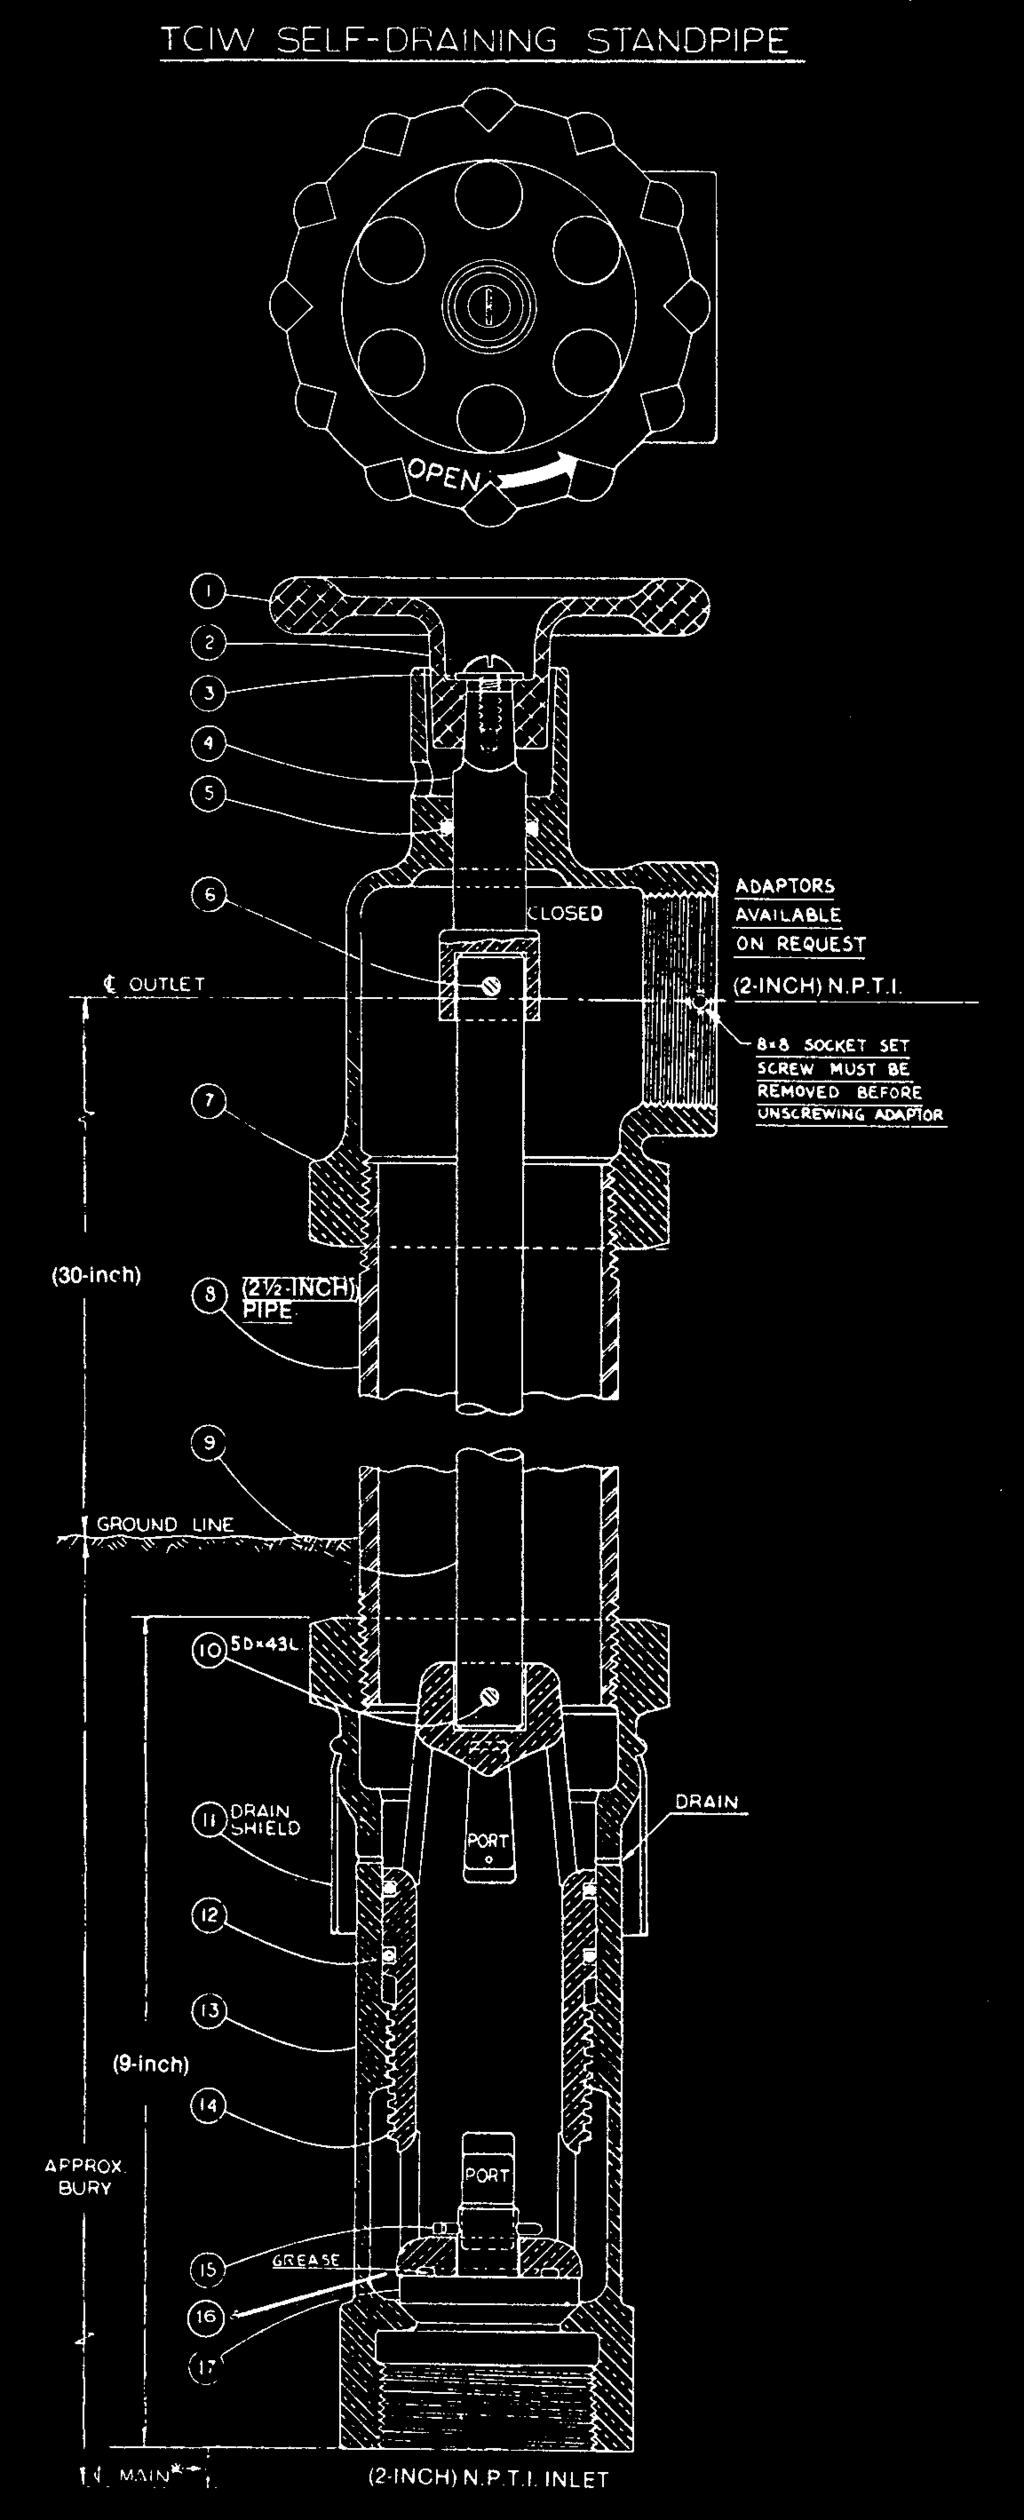 SELF-DRAINING STANDPIPE The Terminal City two-inch self-draining stand pipe is a facty assembled unit specifically designed and constructed to take the place of in-field component assembled units.